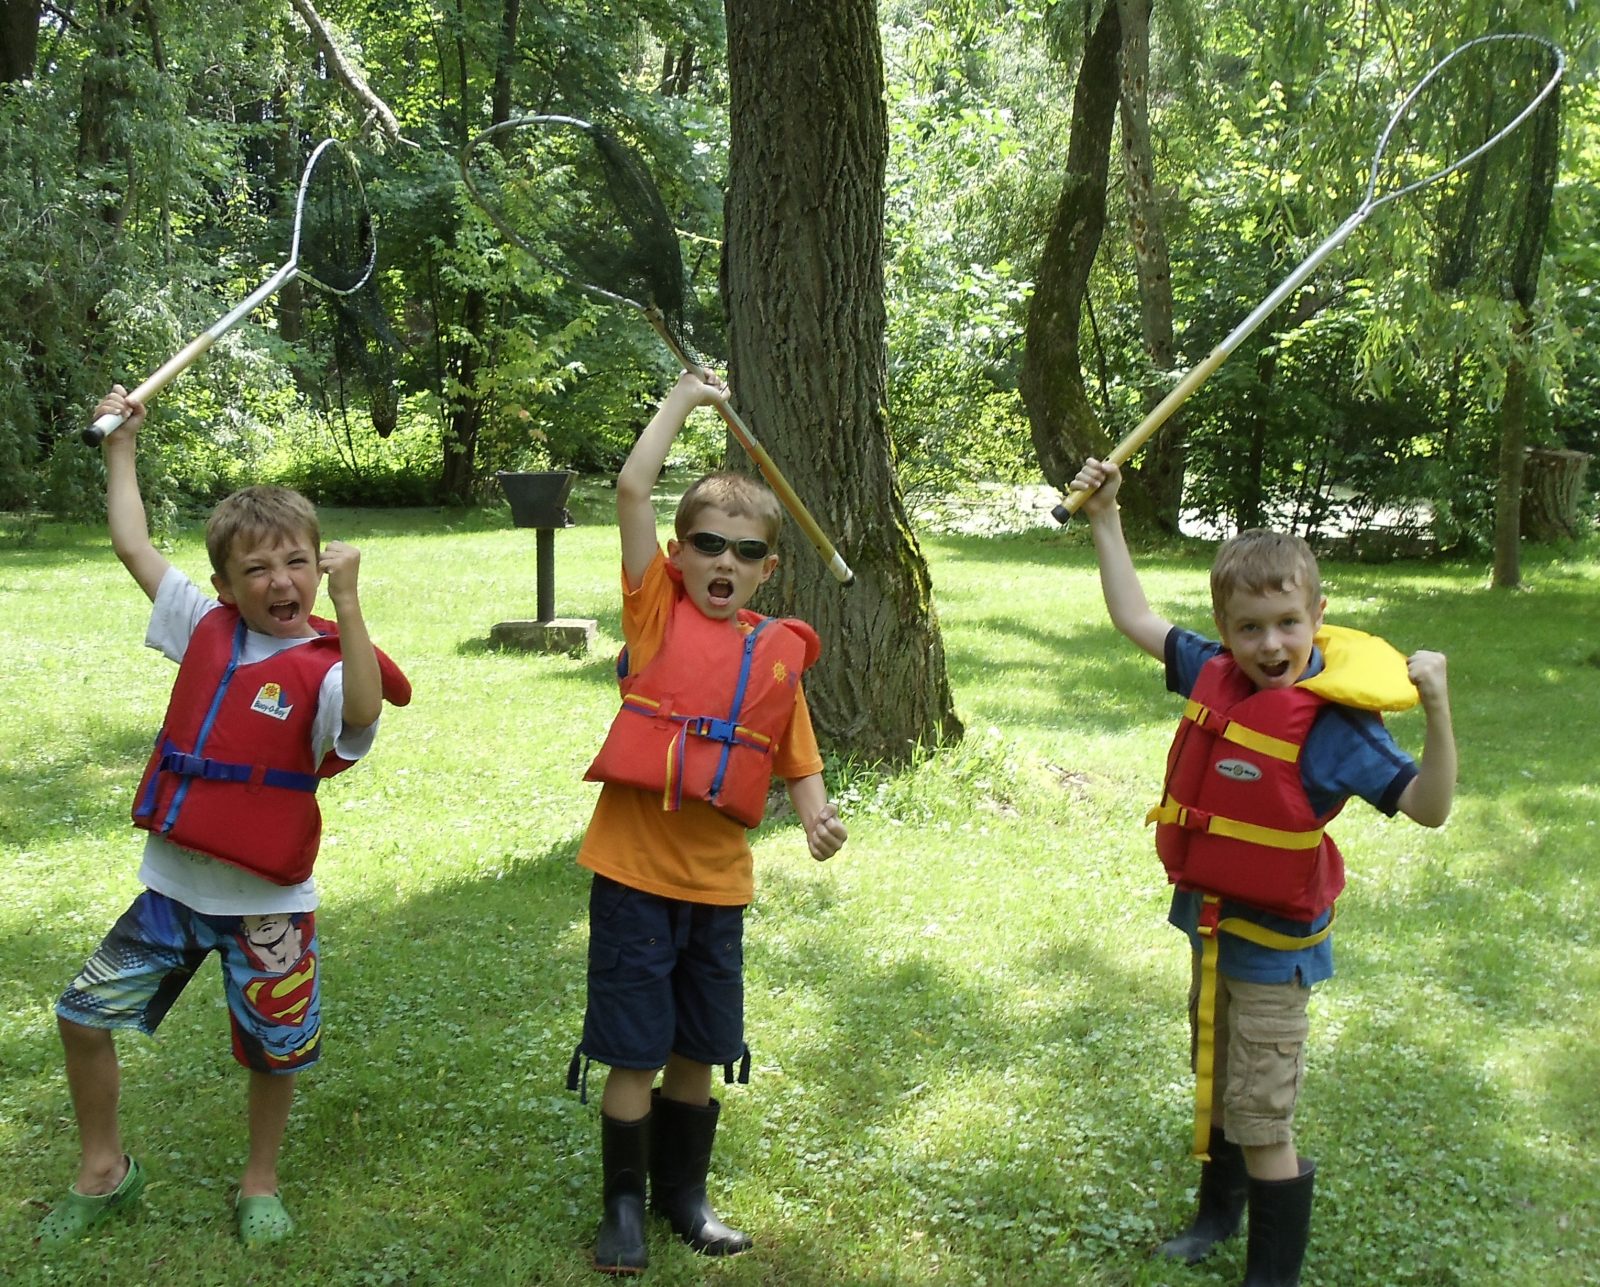 River institute’s summer camp is coming up